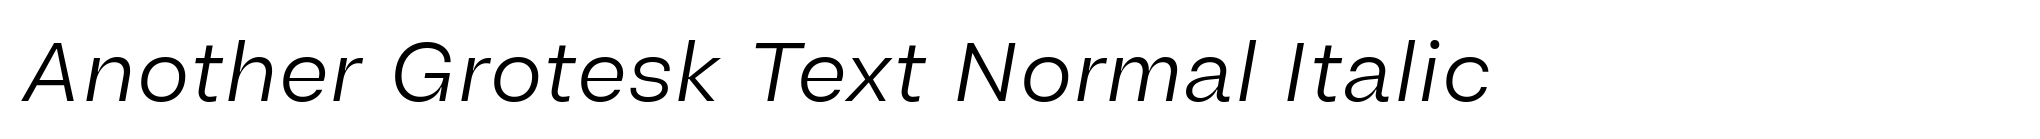 Another Grotesk Text Normal Italic image